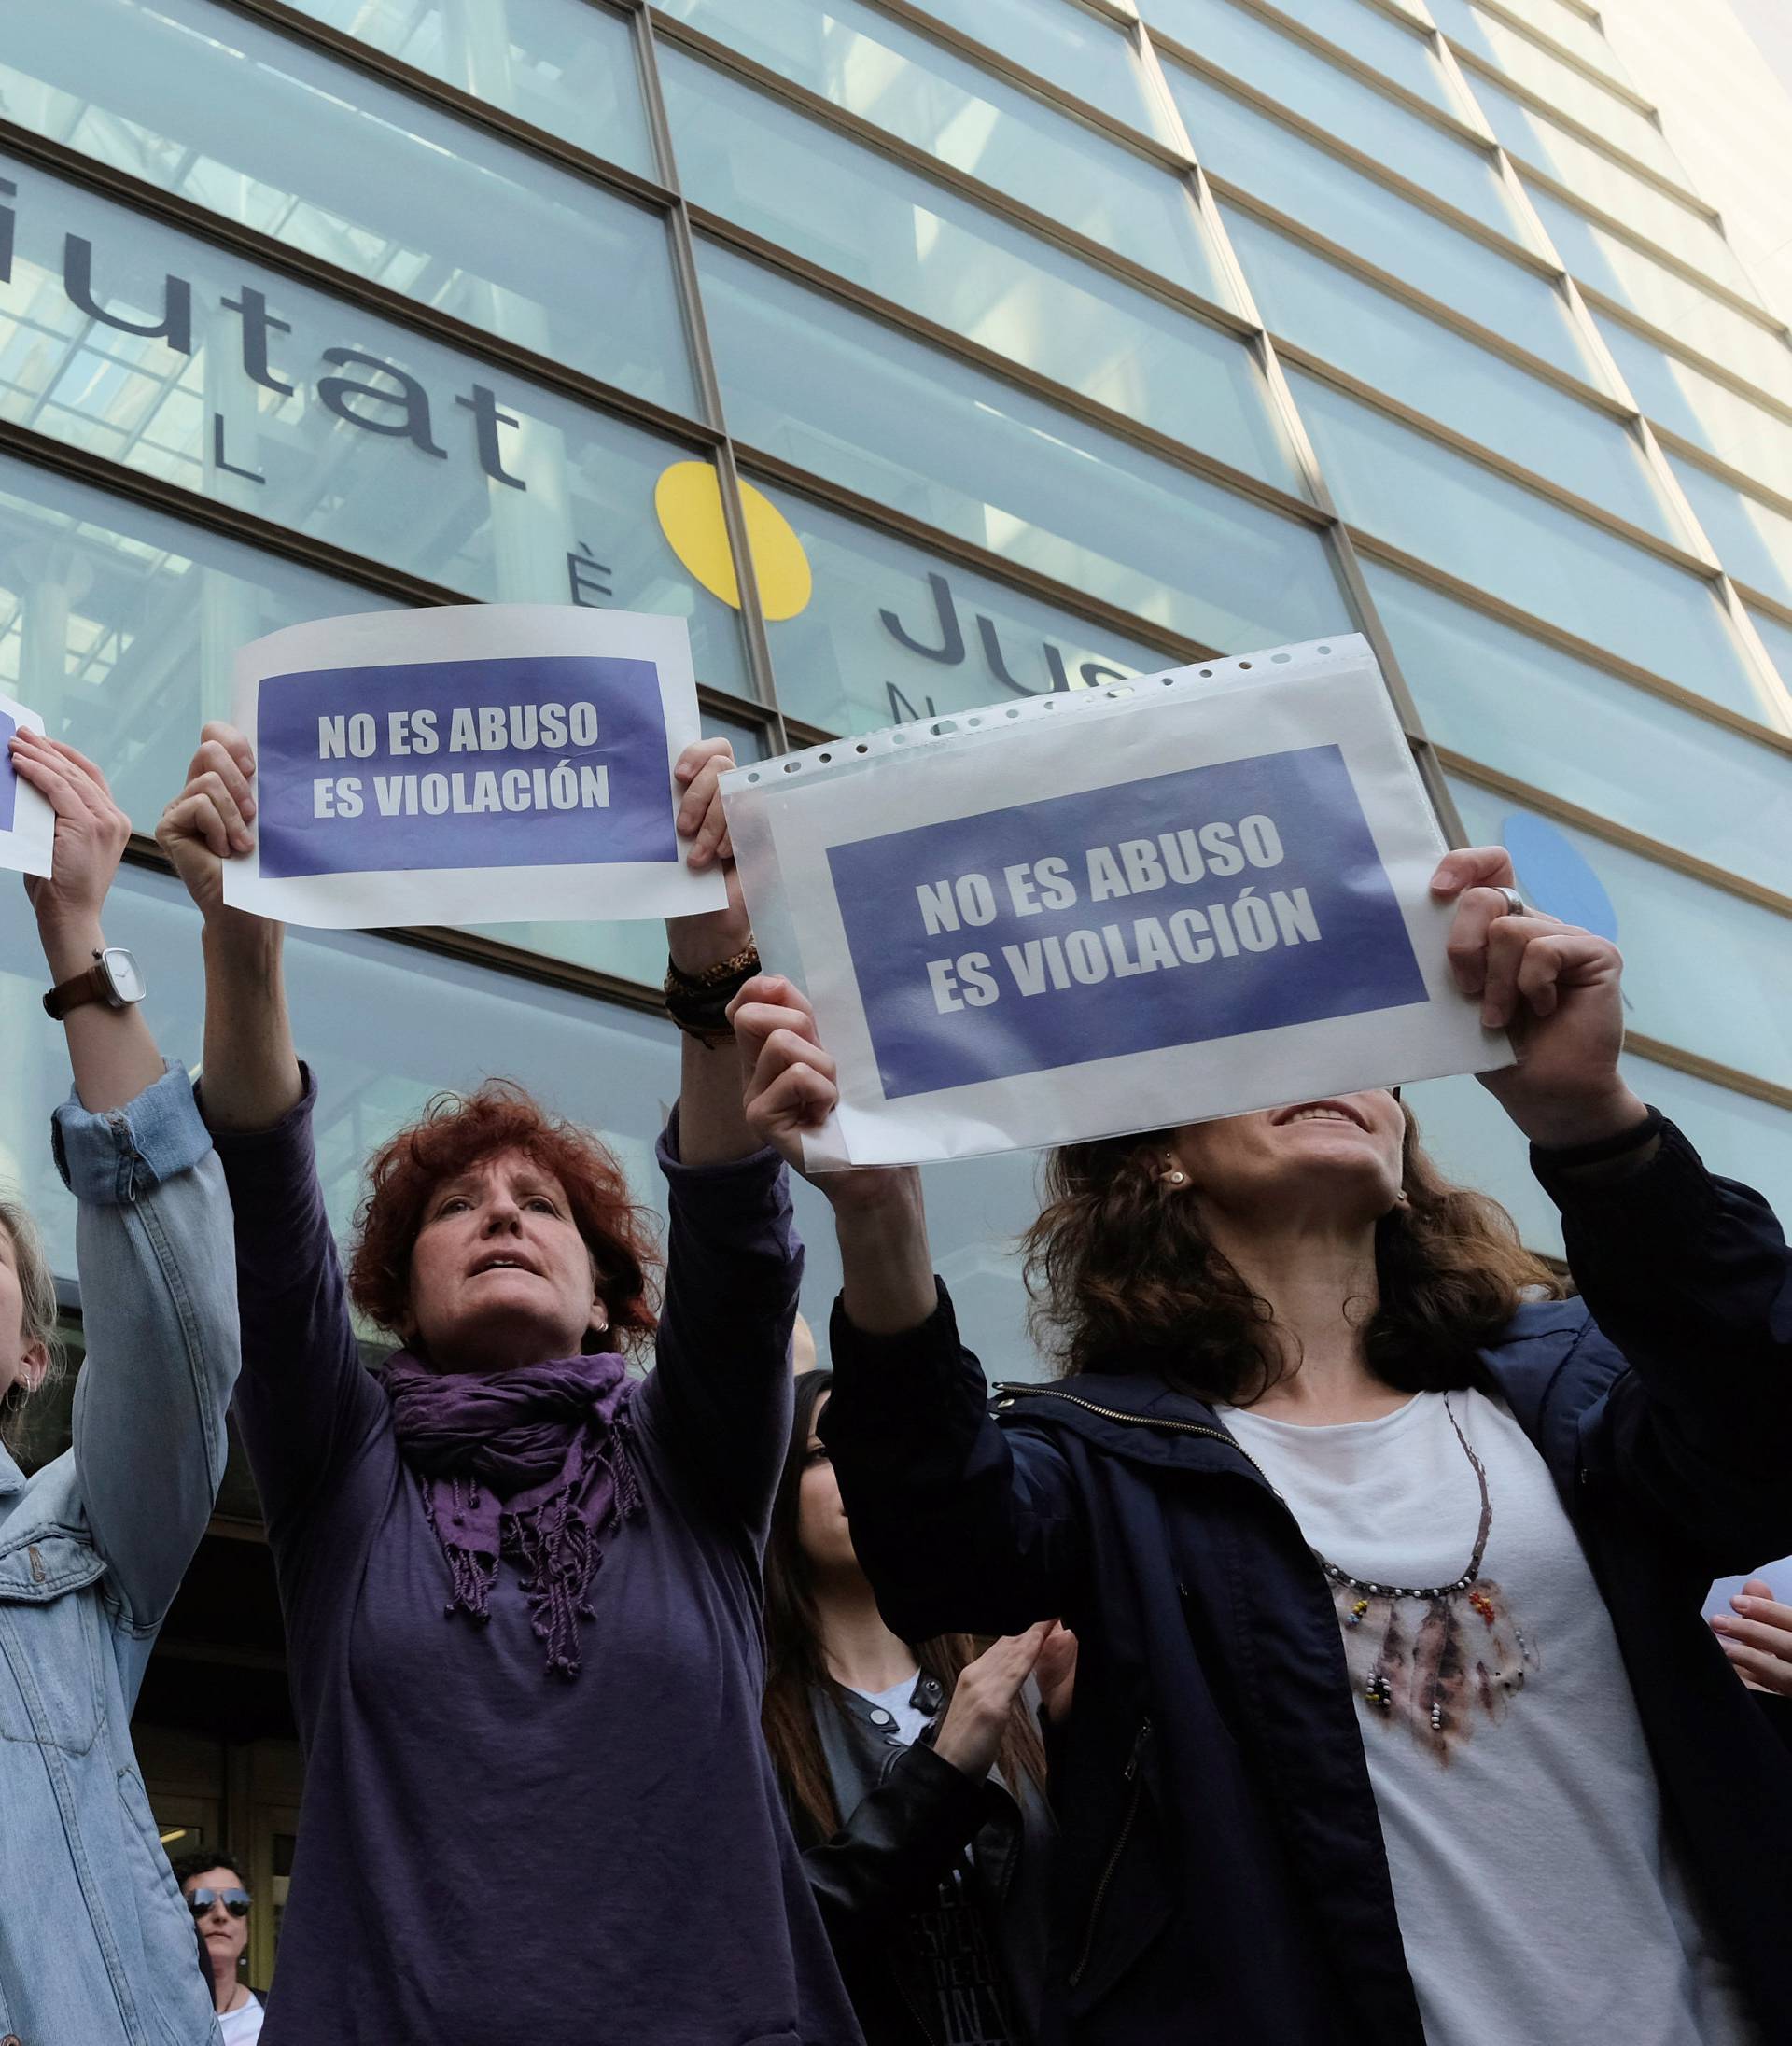 People shout slogans while holding signs during a protest outside the City of Justice in Valencia